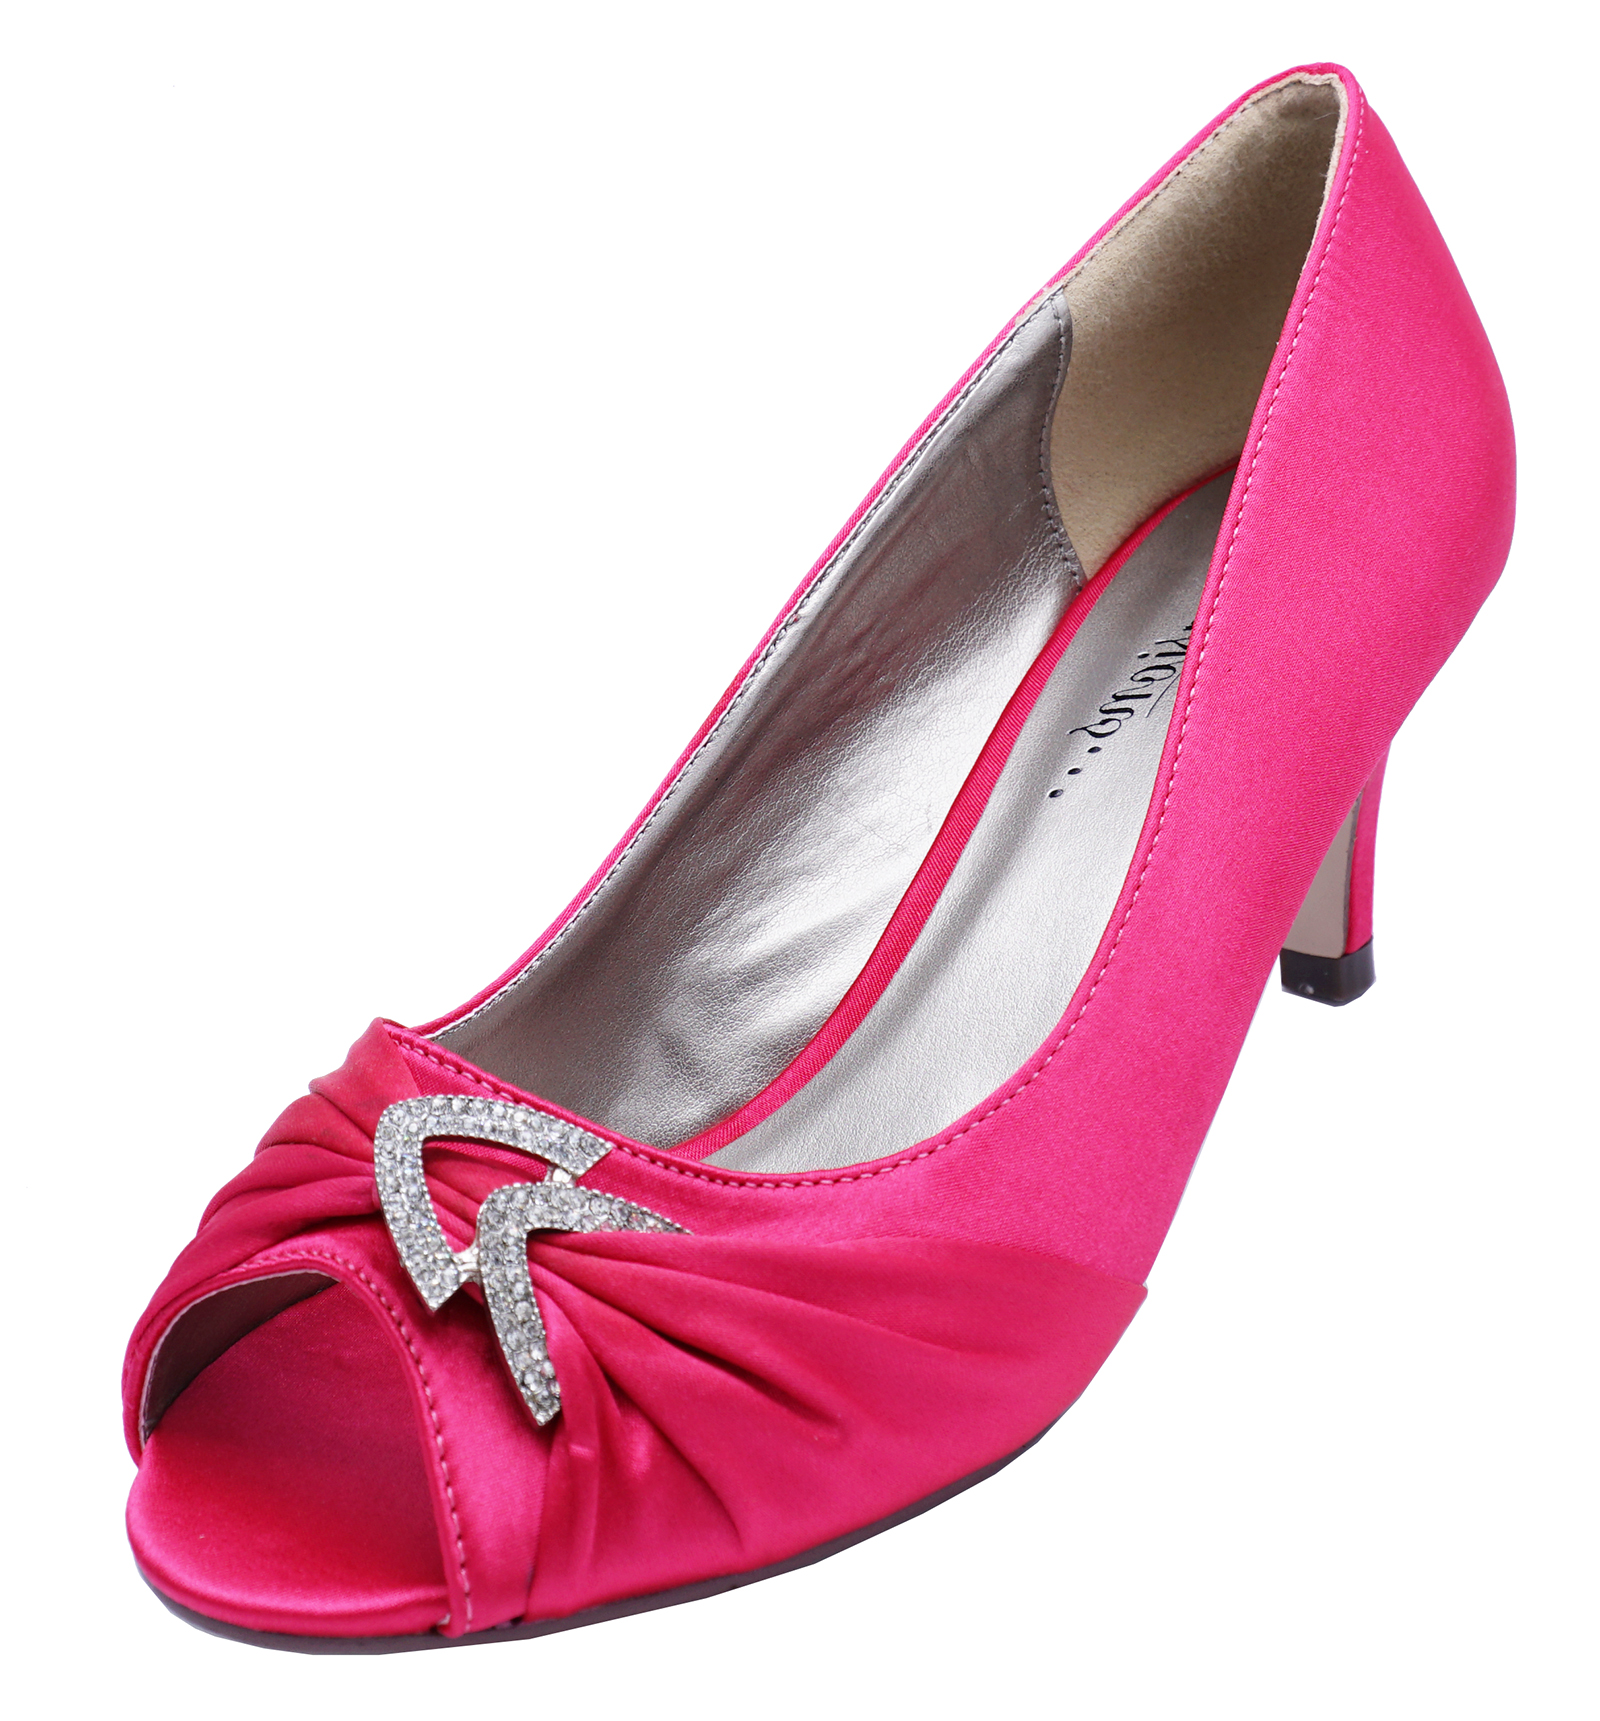 low heeled pink shoes